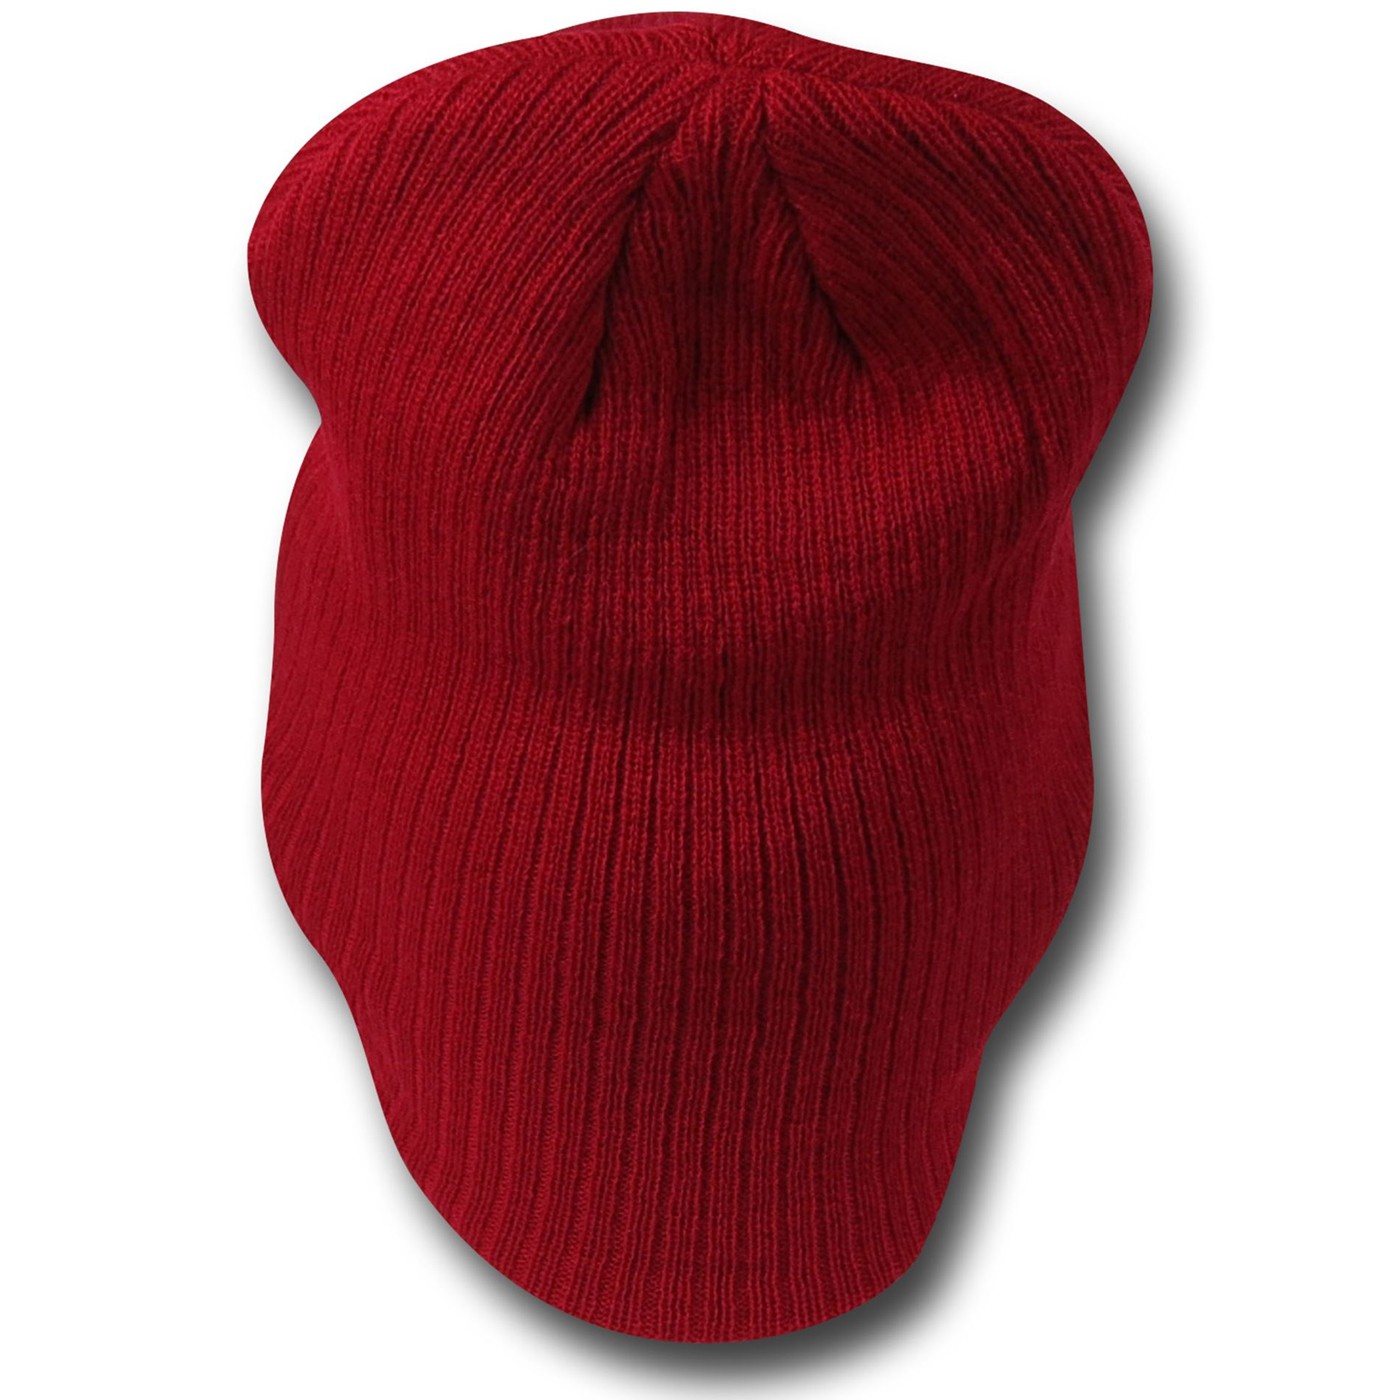 Wonder Woman Red Slouch Beanie